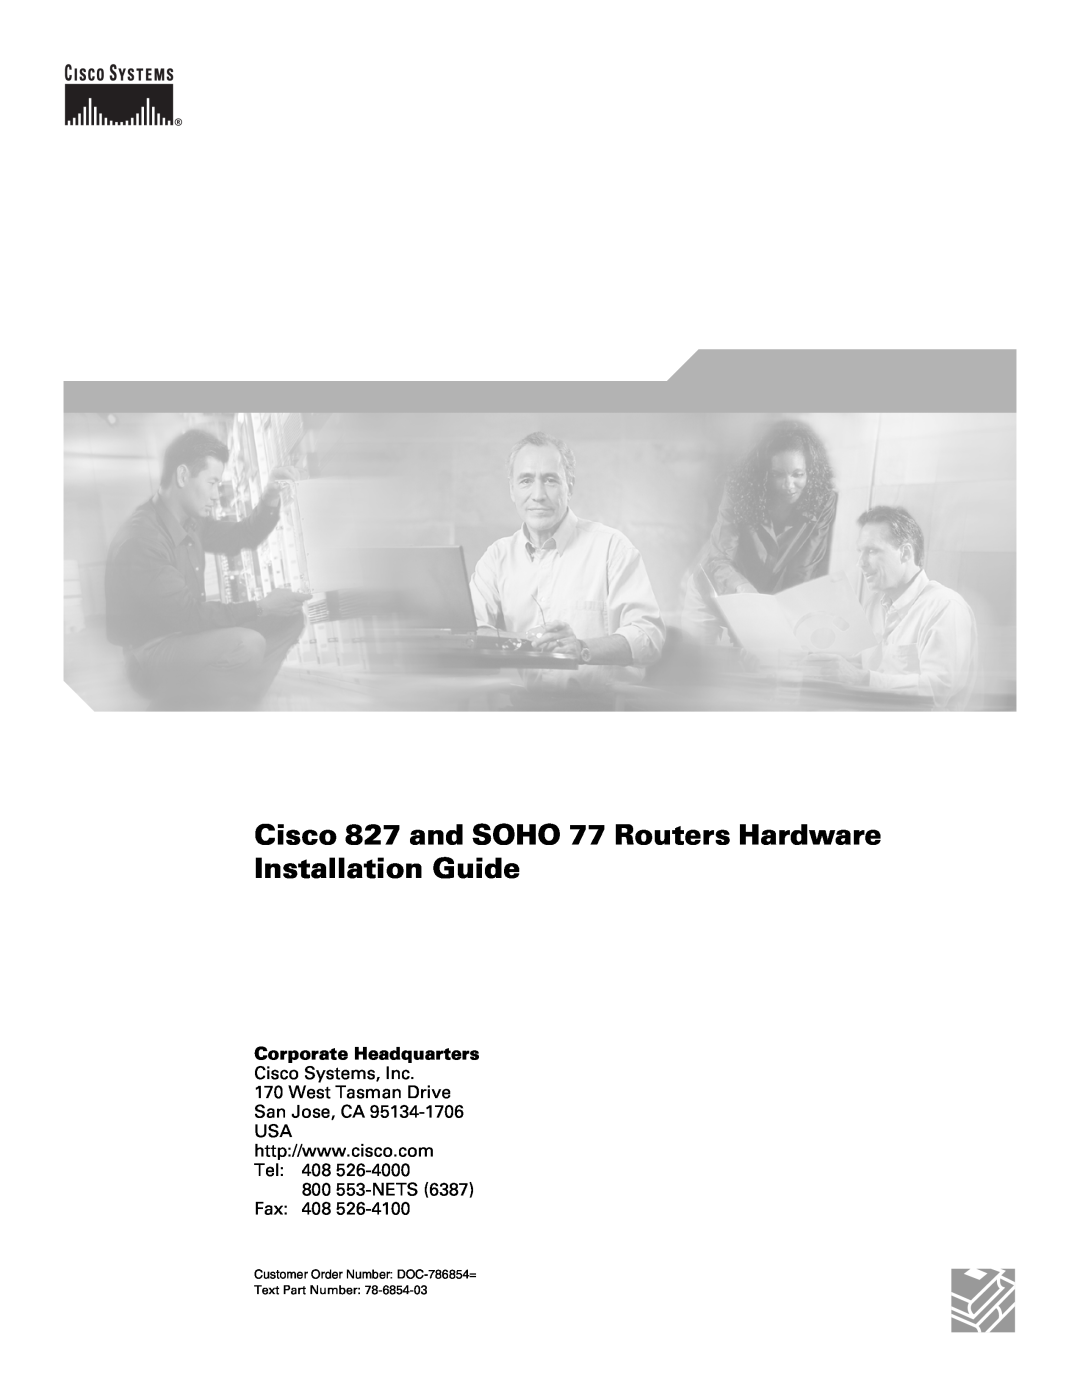 Cisco Systems manual Cisco 827 and SOHO 77 Routers Hardware Installation Guide, 800 553-NETS Fax 408, Text Part Number 